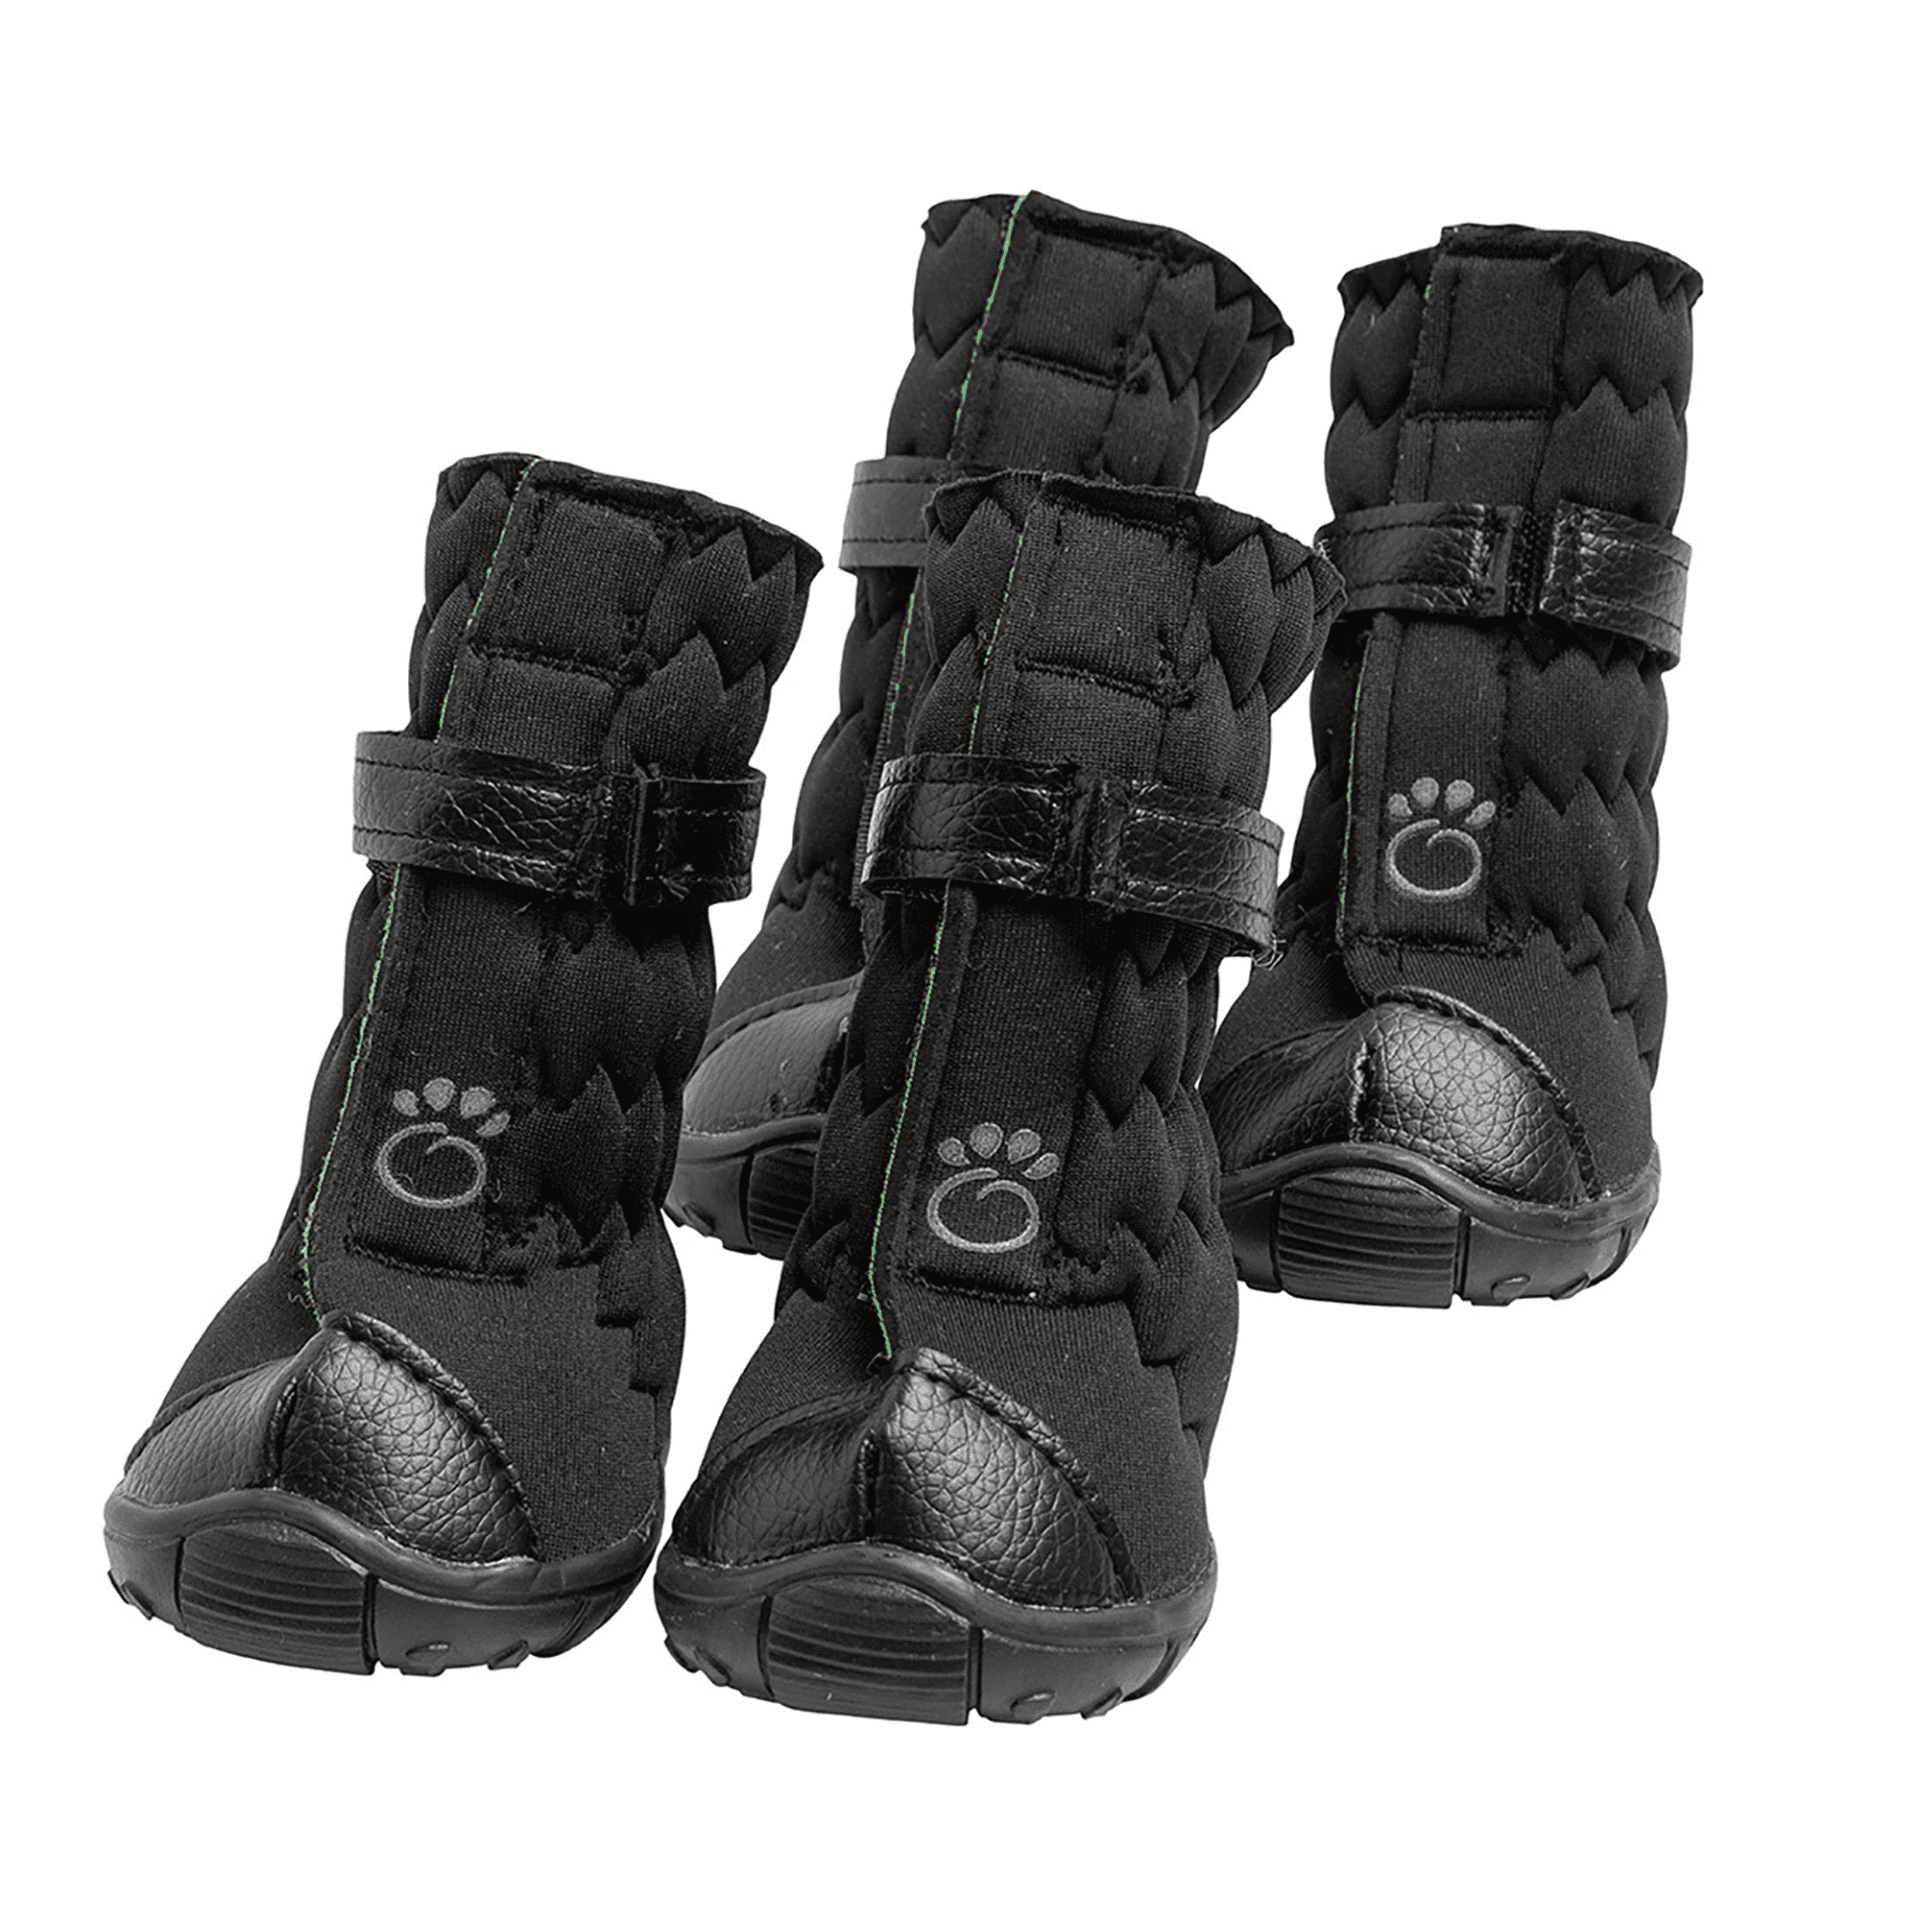 Elasto-Fit Dog Boots - Black - Winter Traction Control